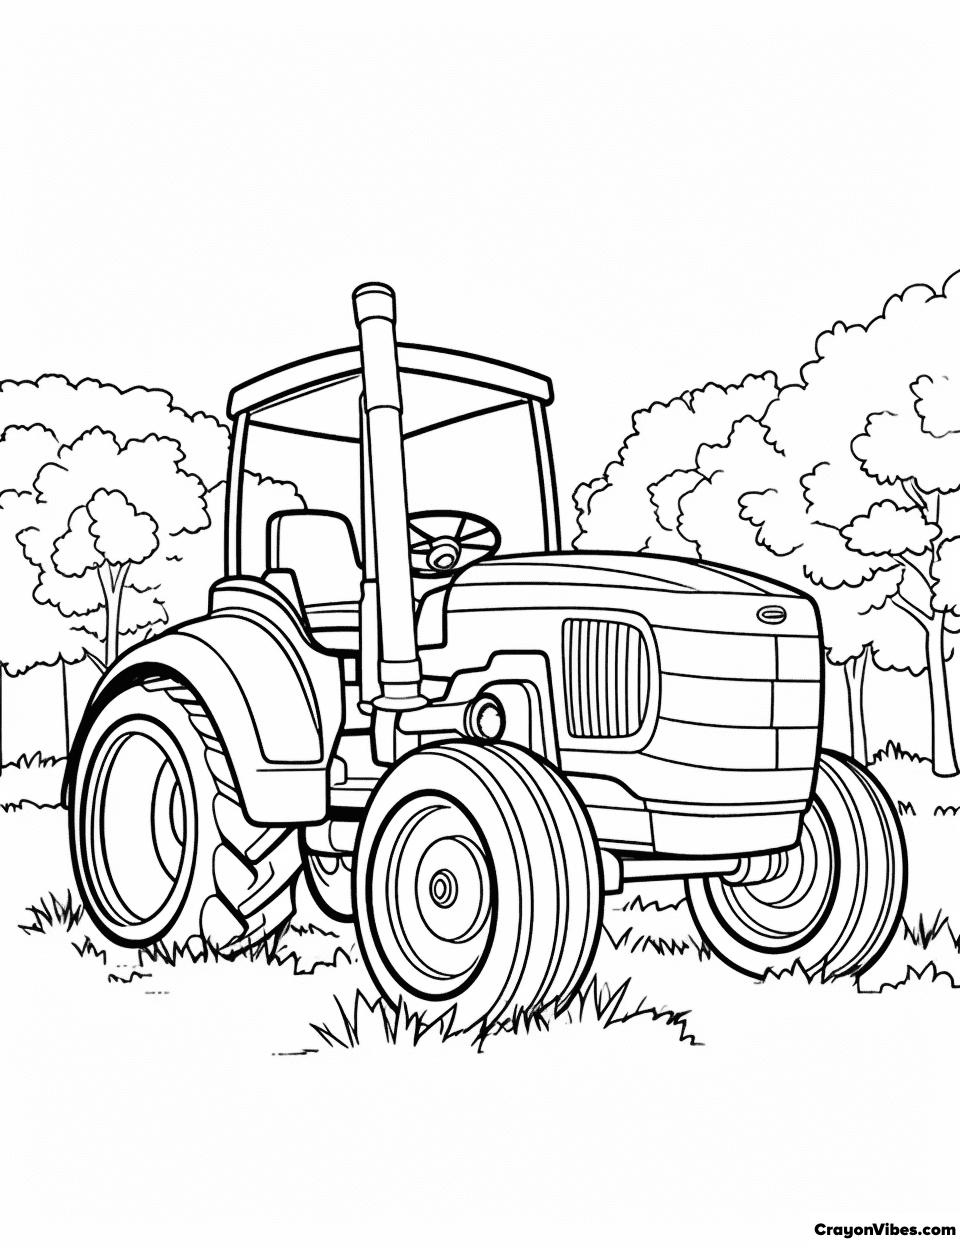 Tractor Coloring Pages Free Printables for Kids & Adults